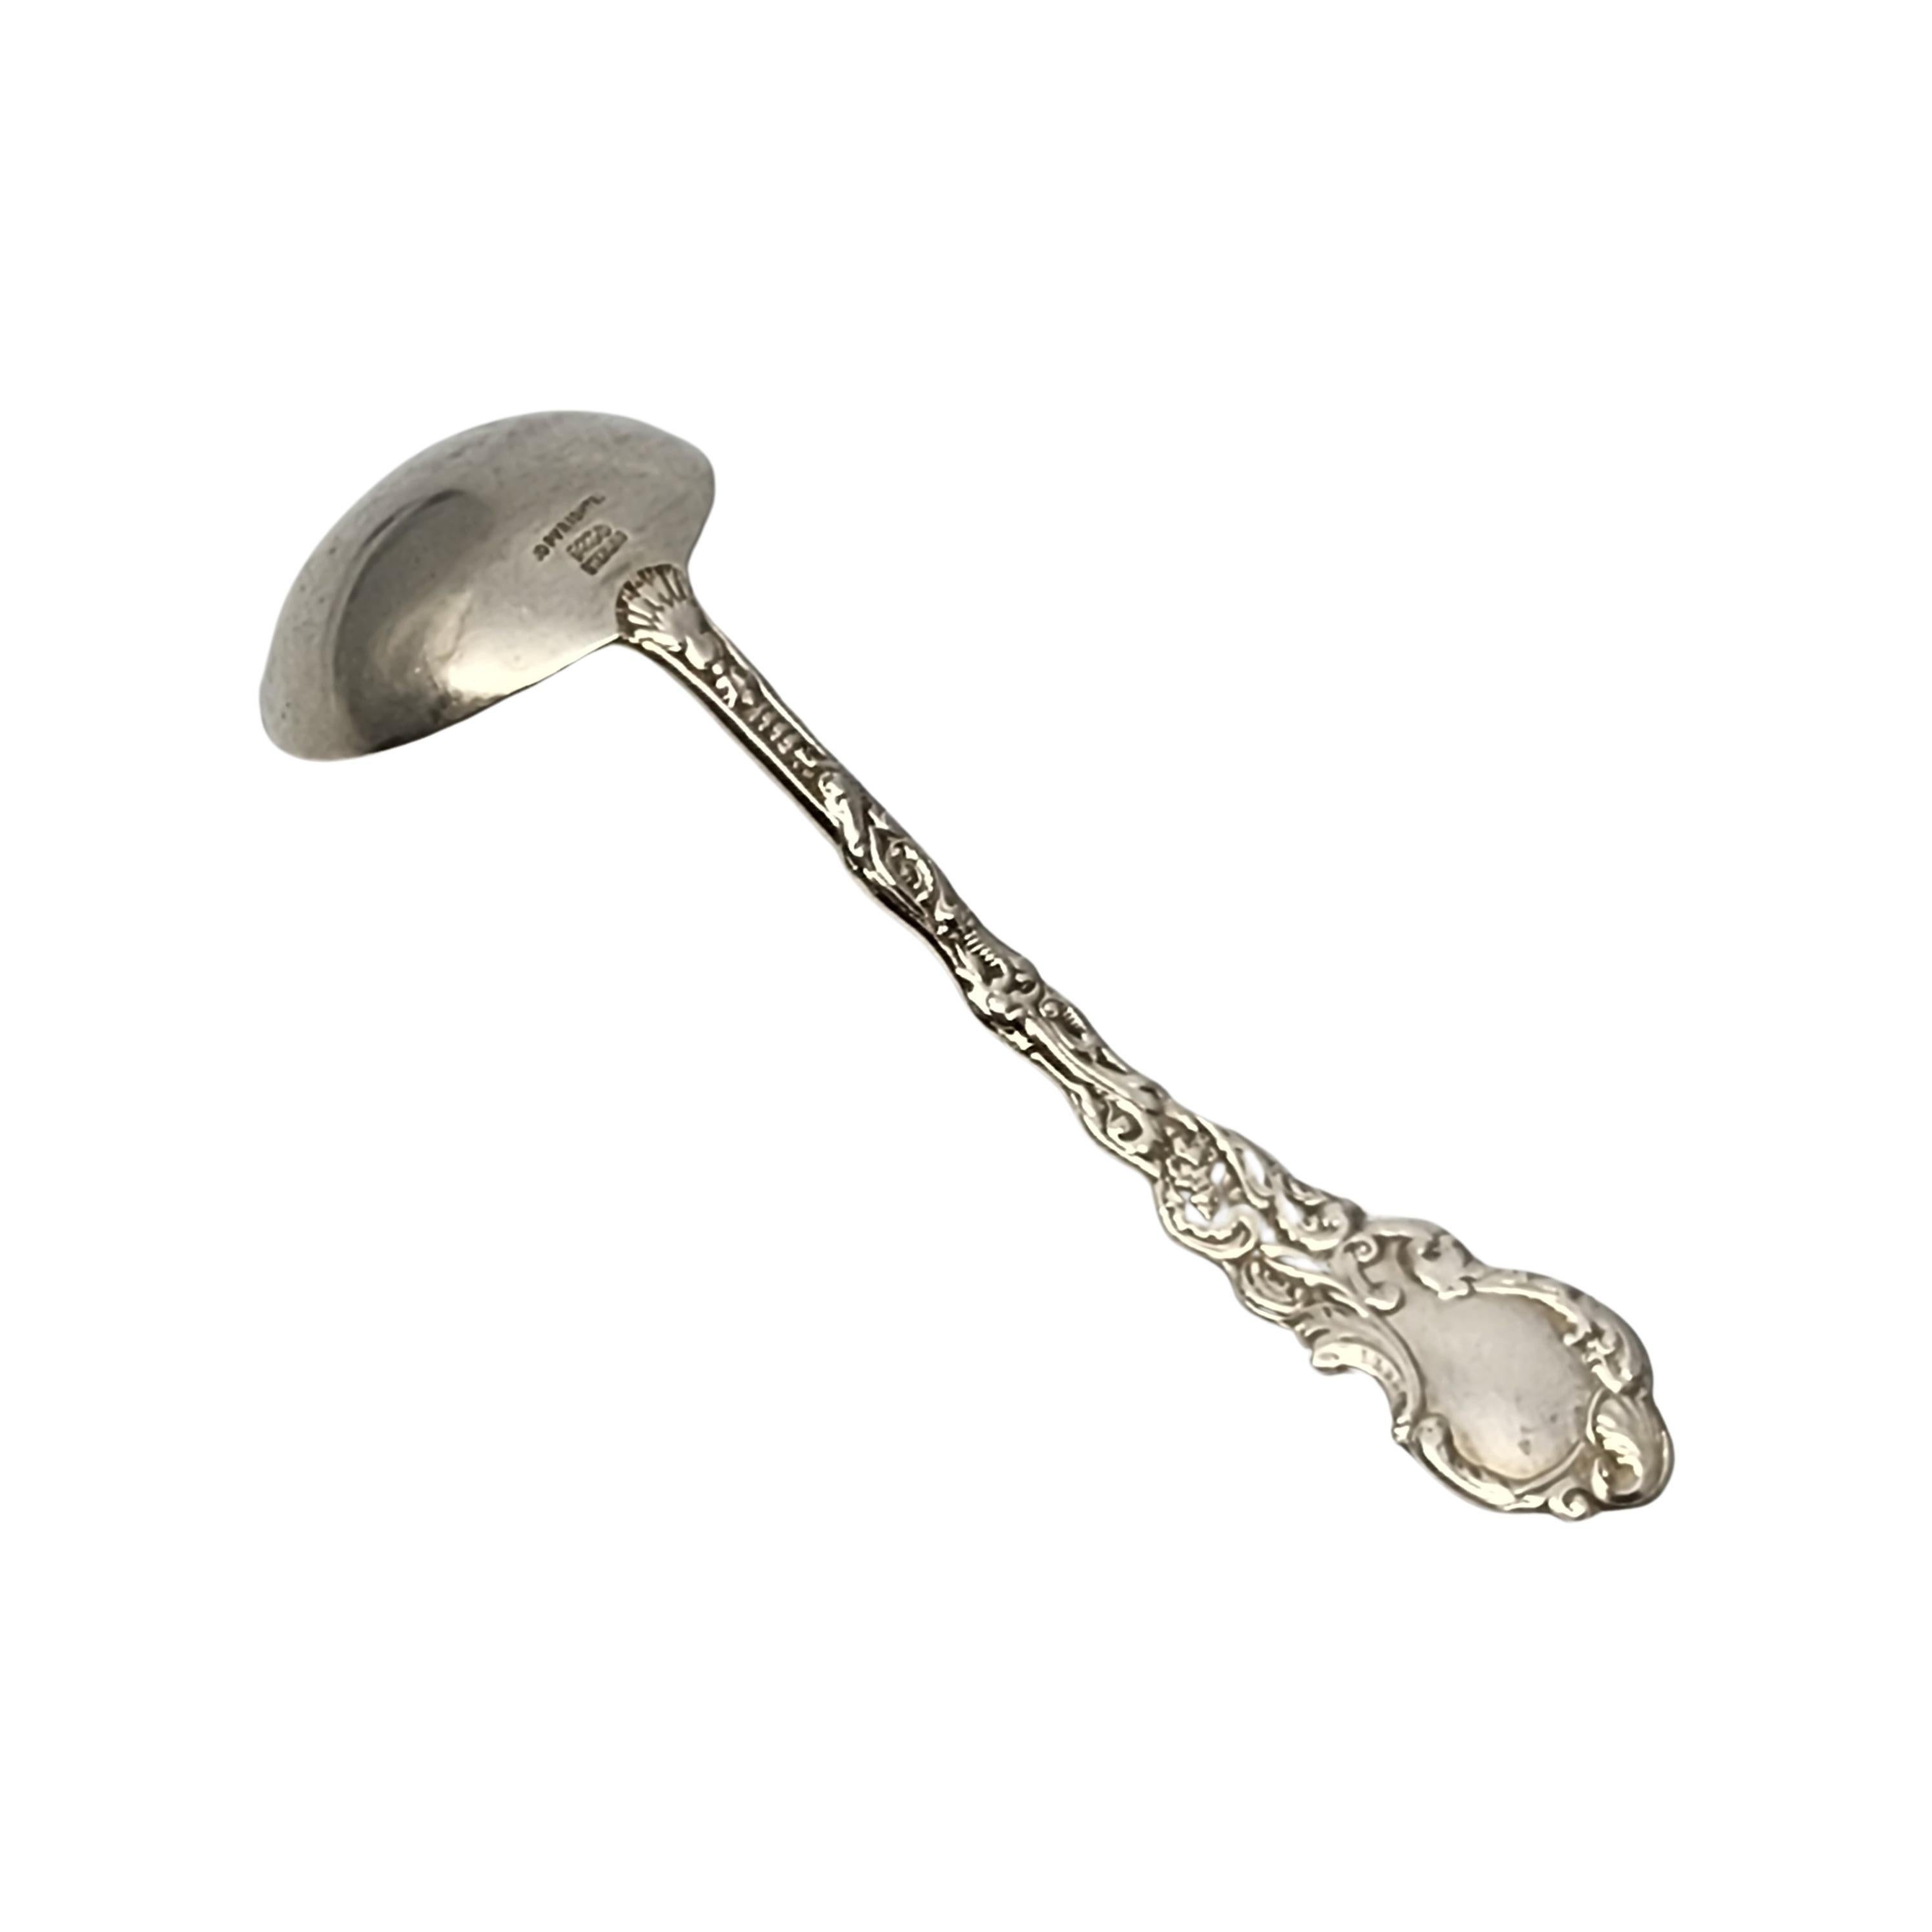 Sterling silver with gold wash bowl cream ladle by Gorham in the Versailles pattern.

No monogram

Gorham's Versailles is a multi motif pattern designed by Antoine Heller in 1885. Named for the Palace of Versailles, the pattern depicts ornate scenes